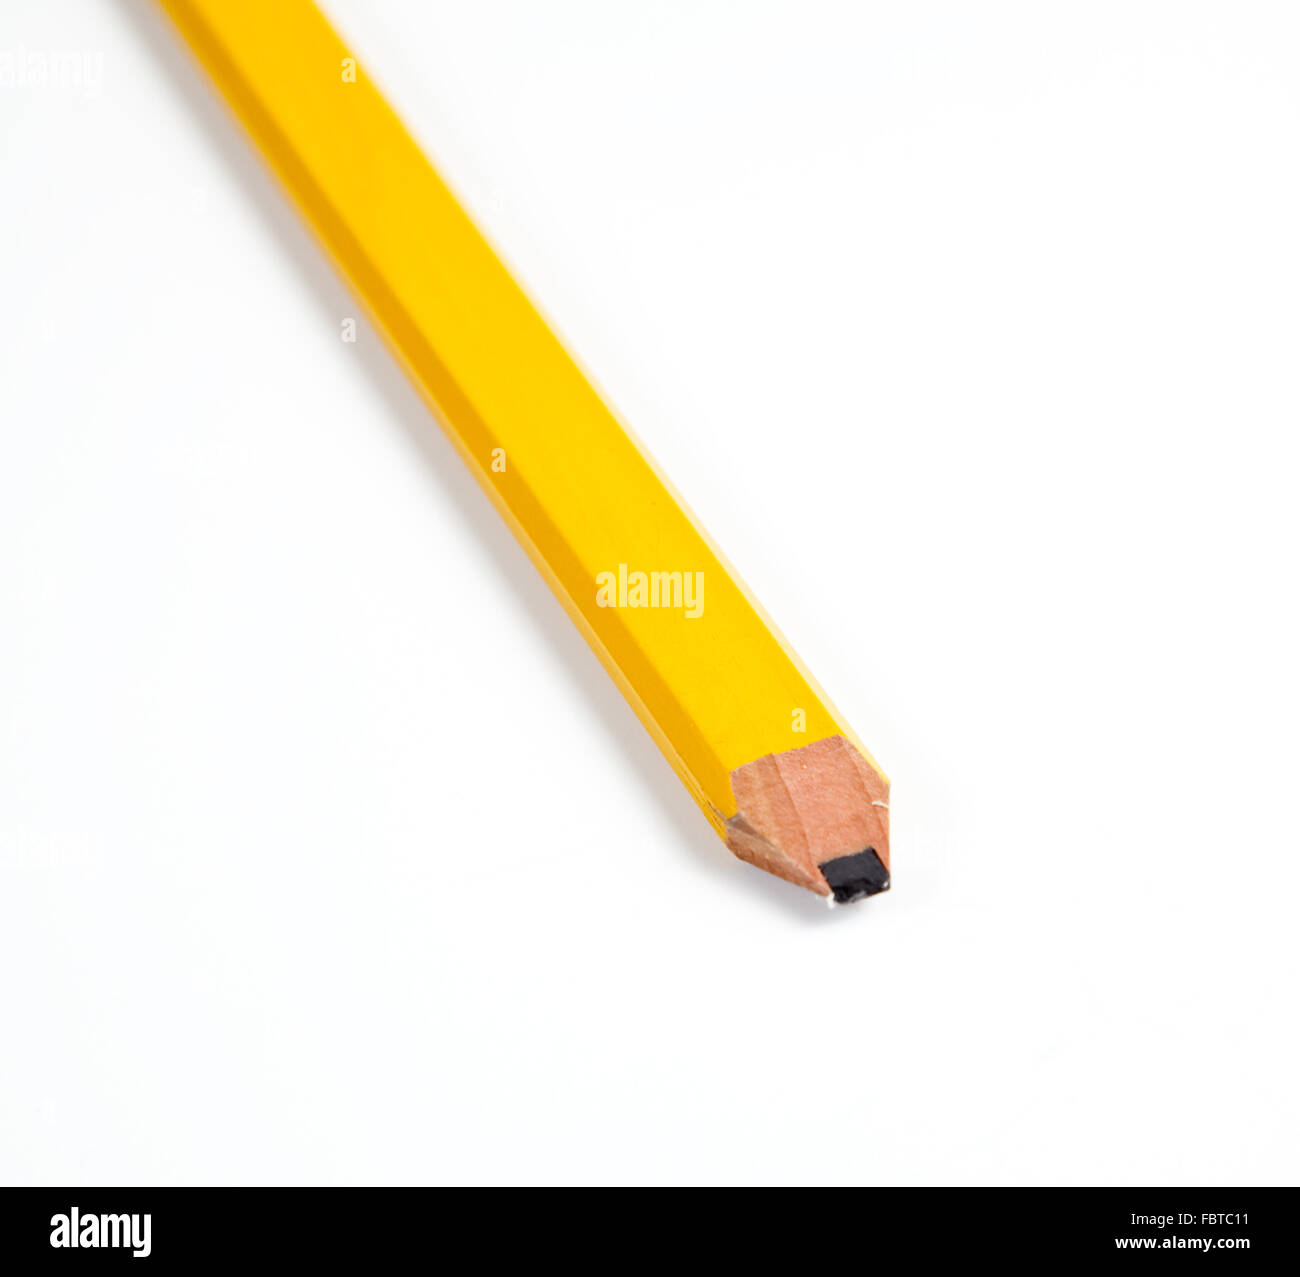 Close up of a wooden carpenter's pencil with broad sharpened point Stock Photo